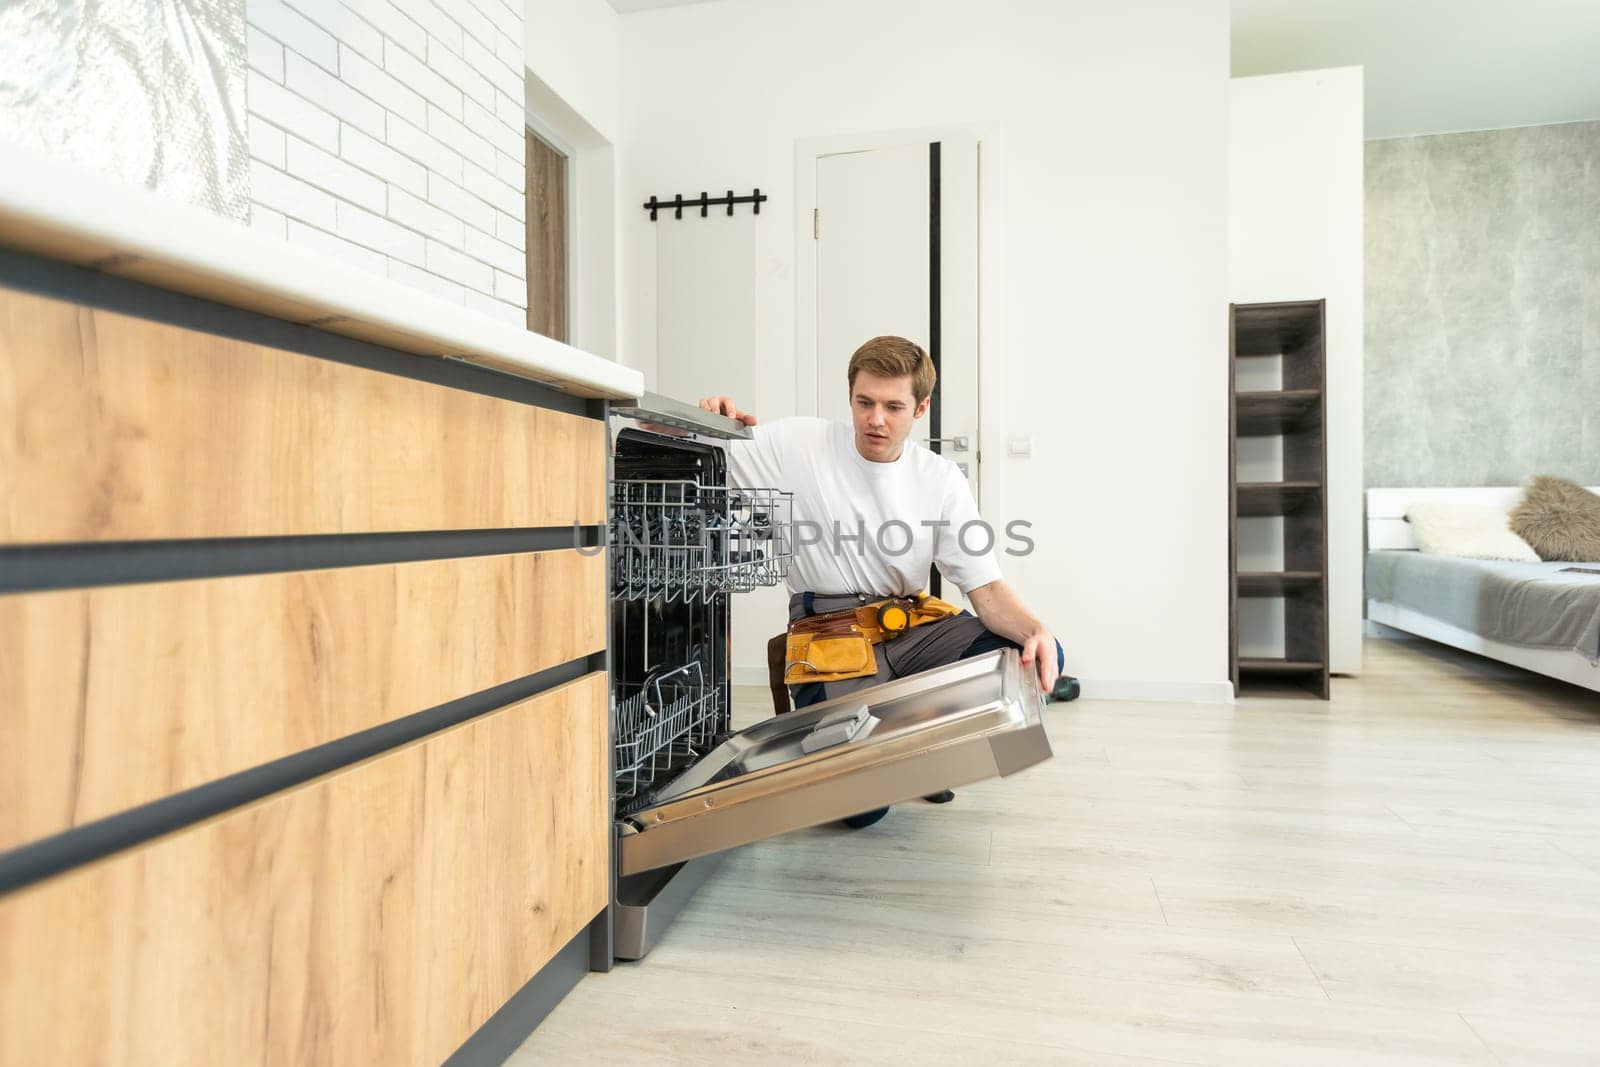 Repairman checks operating state of dishwasher in kitchen by Andelov13